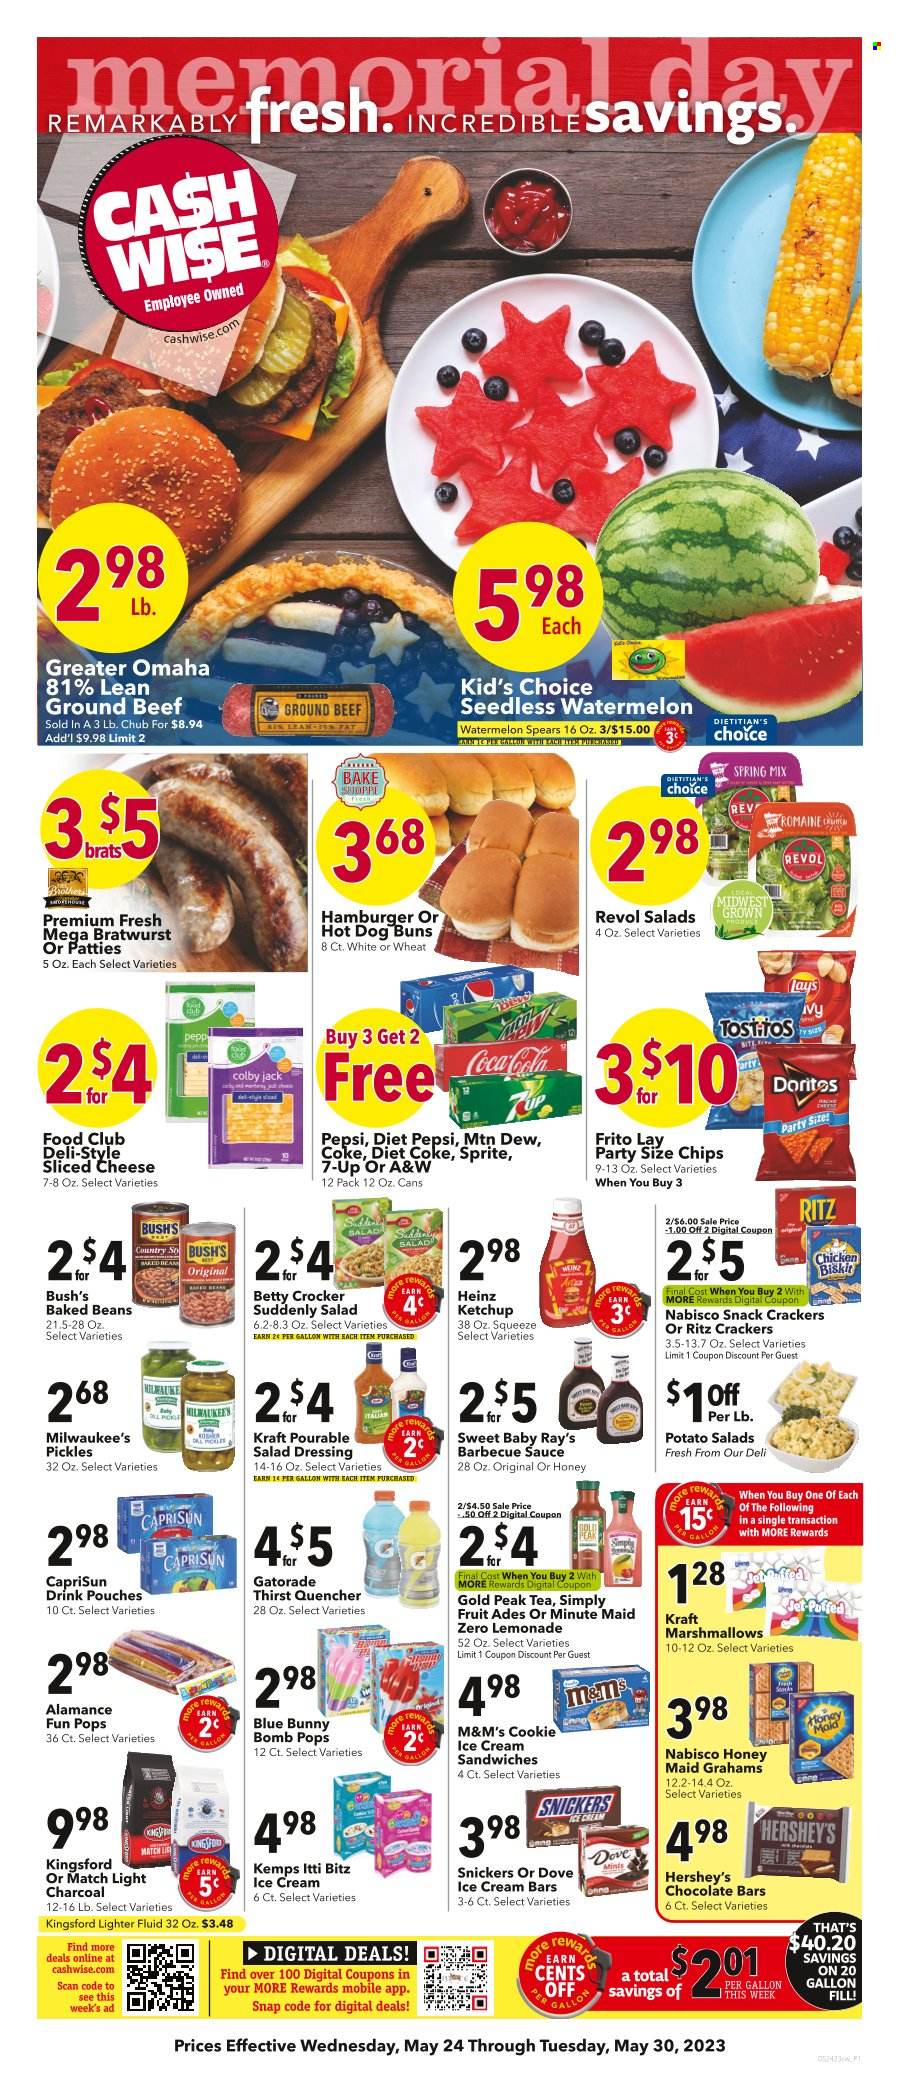 thumbnail - Cash Wise Flyer - 05/24/2023 - 05/30/2023 - Sales products - buns, beans, sauce, Kraft®, Kingsford, snack, bratwurst, Colby cheese, sliced cheese, Kemps, ice cream, ice cream bars, ice cream sandwich, Hershey's, Blue Bunny, Dove, marshmallows, Snickers, M&M's, crackers, RITZ, chocolate bar, Candy, Nabisco, Doritos, chips, Lay’s, salty snack, Heinz, pickles, baked beans, Honey Maid, BBQ sauce, salad dressing, ketchup, dressing, Coca-Cola, lemonade, Mountain Dew, Sprite, Pepsi, ice tea, Diet Pepsi, Diet Coke, soft drink, 7UP, A&W, Gold Peak Tea, Gatorade, fruit punch, Coke, BROTHERS, chicken, beef meat, ground beef. Page 1.